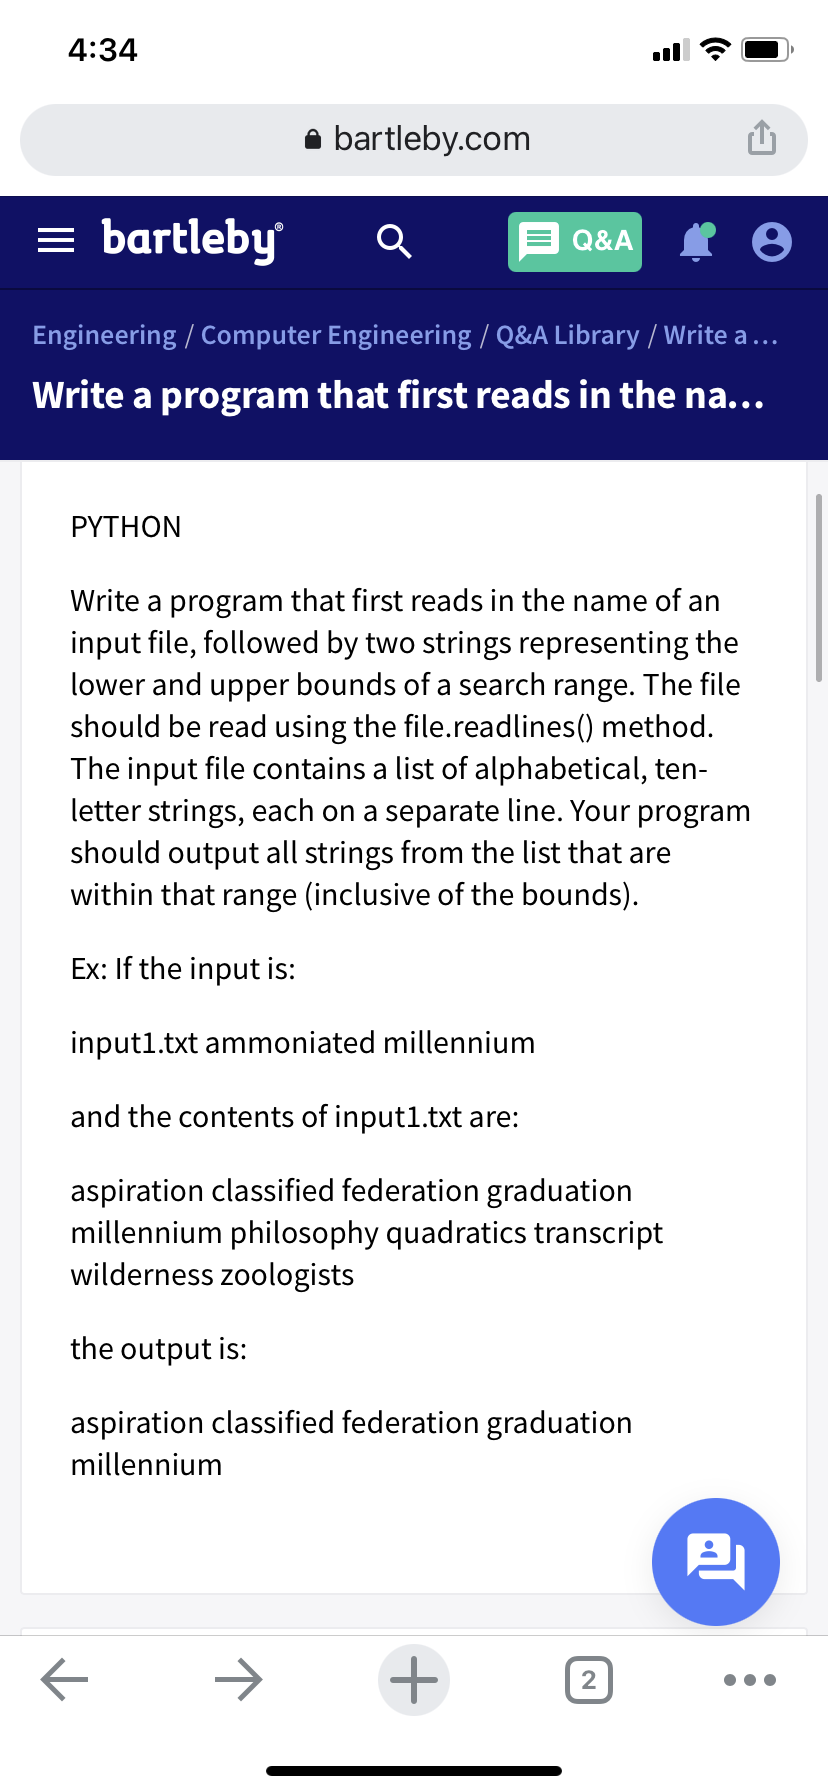 4:34
bartleby.com
bartleby
Q&A
Engineering / Computer Engineering / Q&A Library / Write a ...
Write a program that first reads in the na...
PYTHON
Write a program that first reads in the name of an
input file, followed by two strings representing the
lower and upper bounds of a search range. The file
should be read using the file.readlines() method.
The input file contains a list of alphabetical, ten-
letter strings, each on a separate line. Your program
should output all strings from the list that are
within that range (inclusive of the bounds).
Ex: If the input is:
input1.txt ammoniated millennium
and the contents of input1.txt are:
aspiration classified federation graduation
millennium philosophy quadratics transcript
wilderness zoologists
the output is:
aspiration classified federation graduation
millennium
2,
